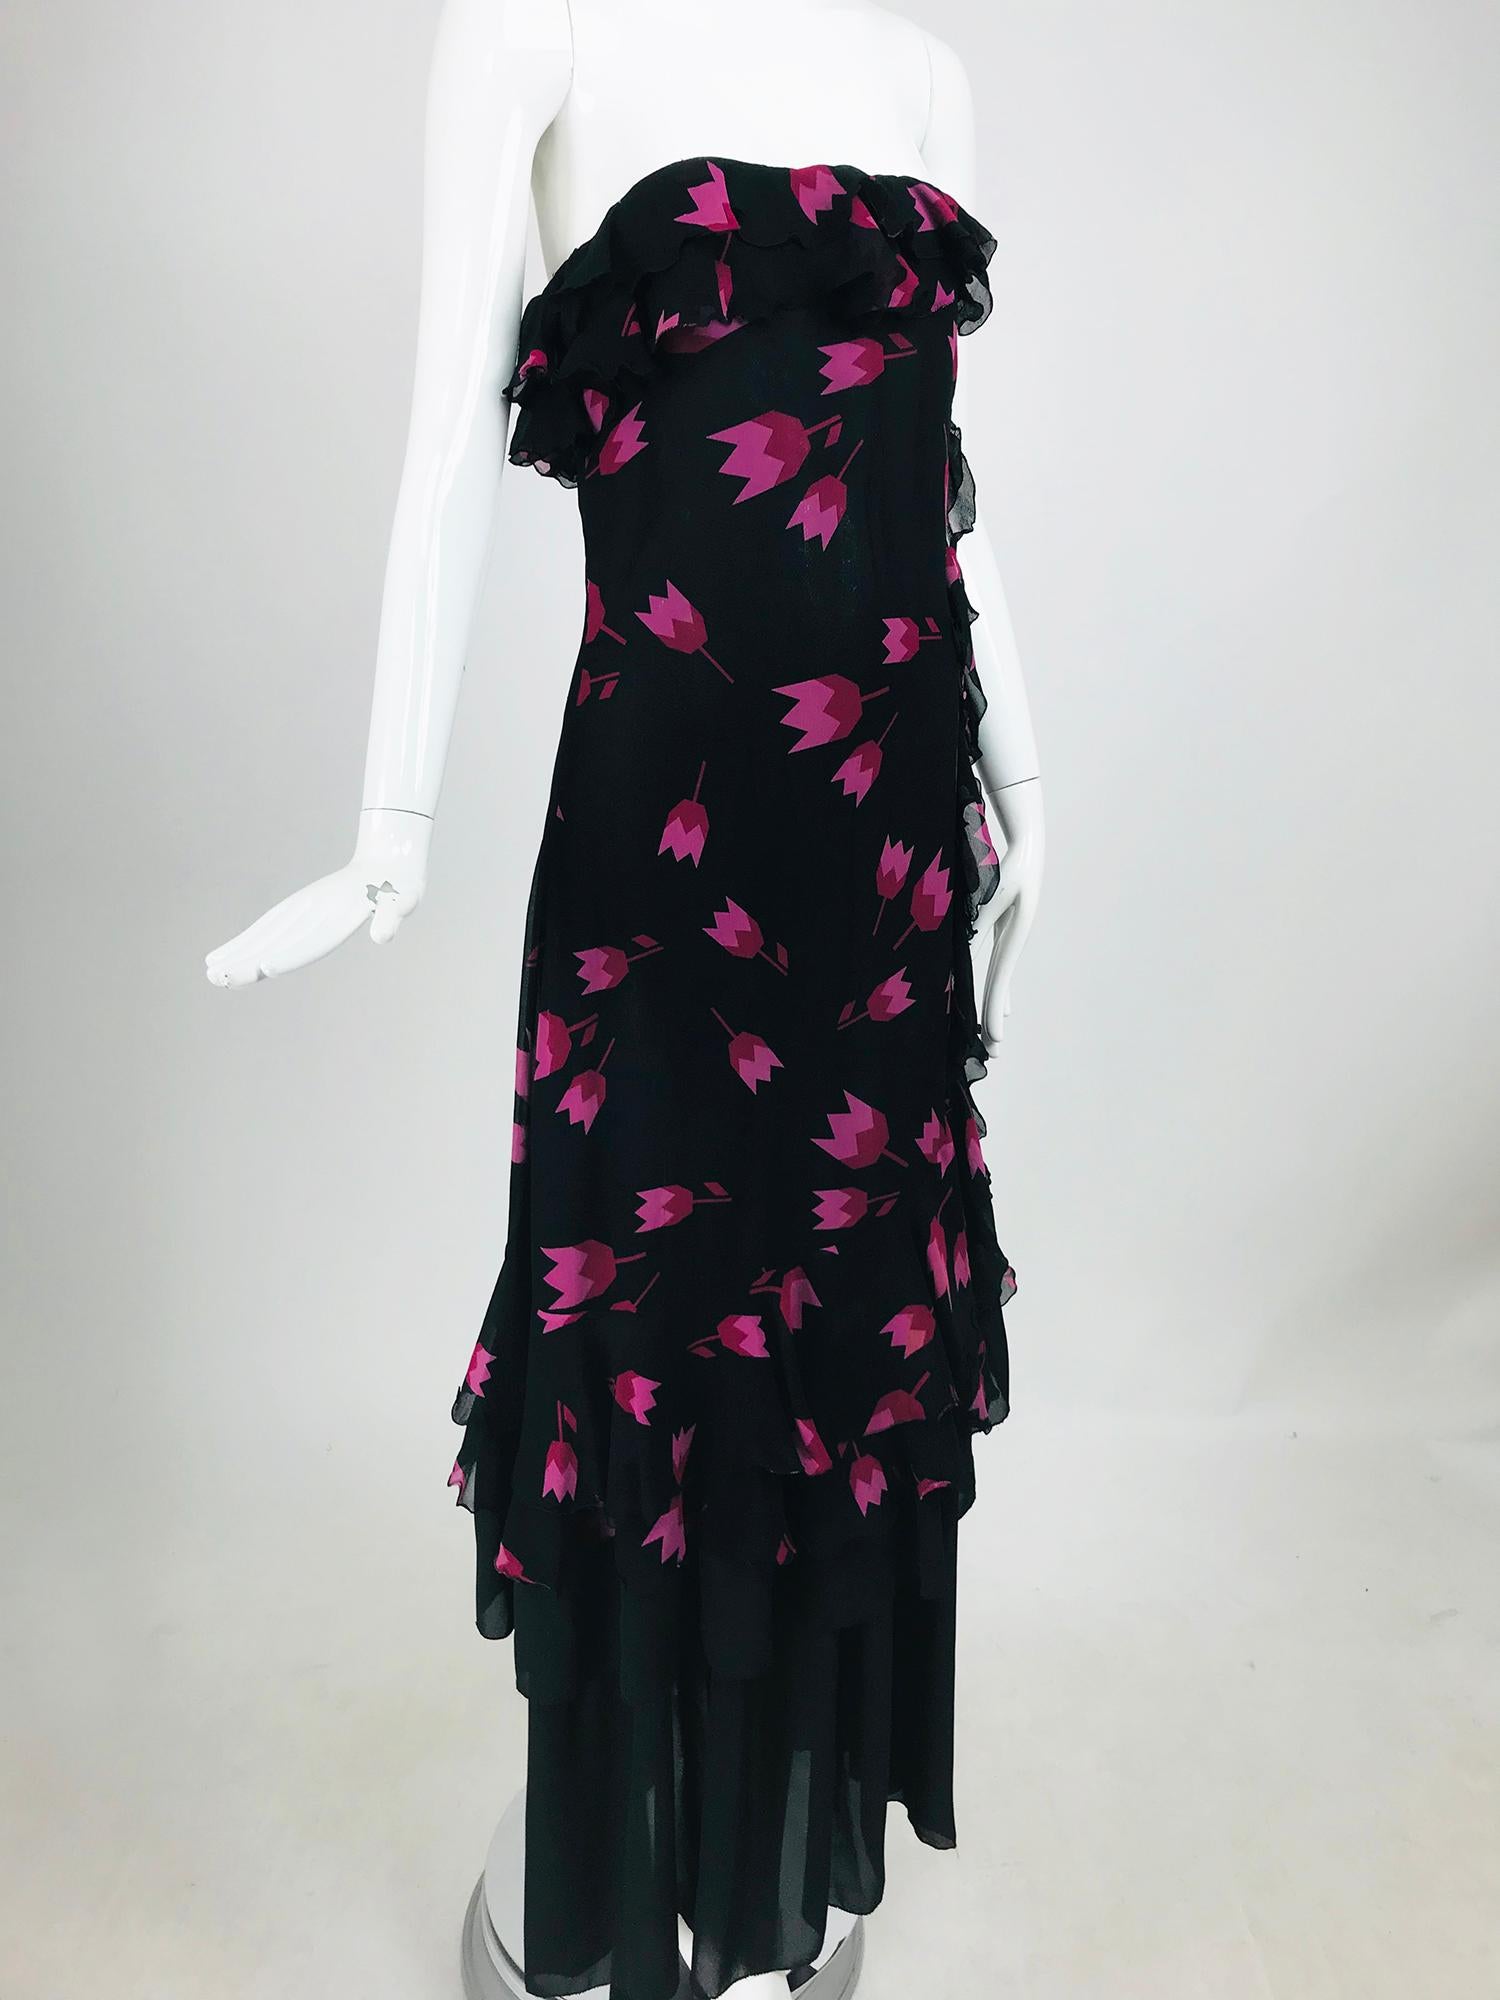 Christian Dior Boutique Tulip print Strapless layered  Maxi Dress from the 1970s during Marc Bohans design tenure at Dior. The Art Deco stylized tulips in the print of the over dress really pop against the black ground making this dress a real stand